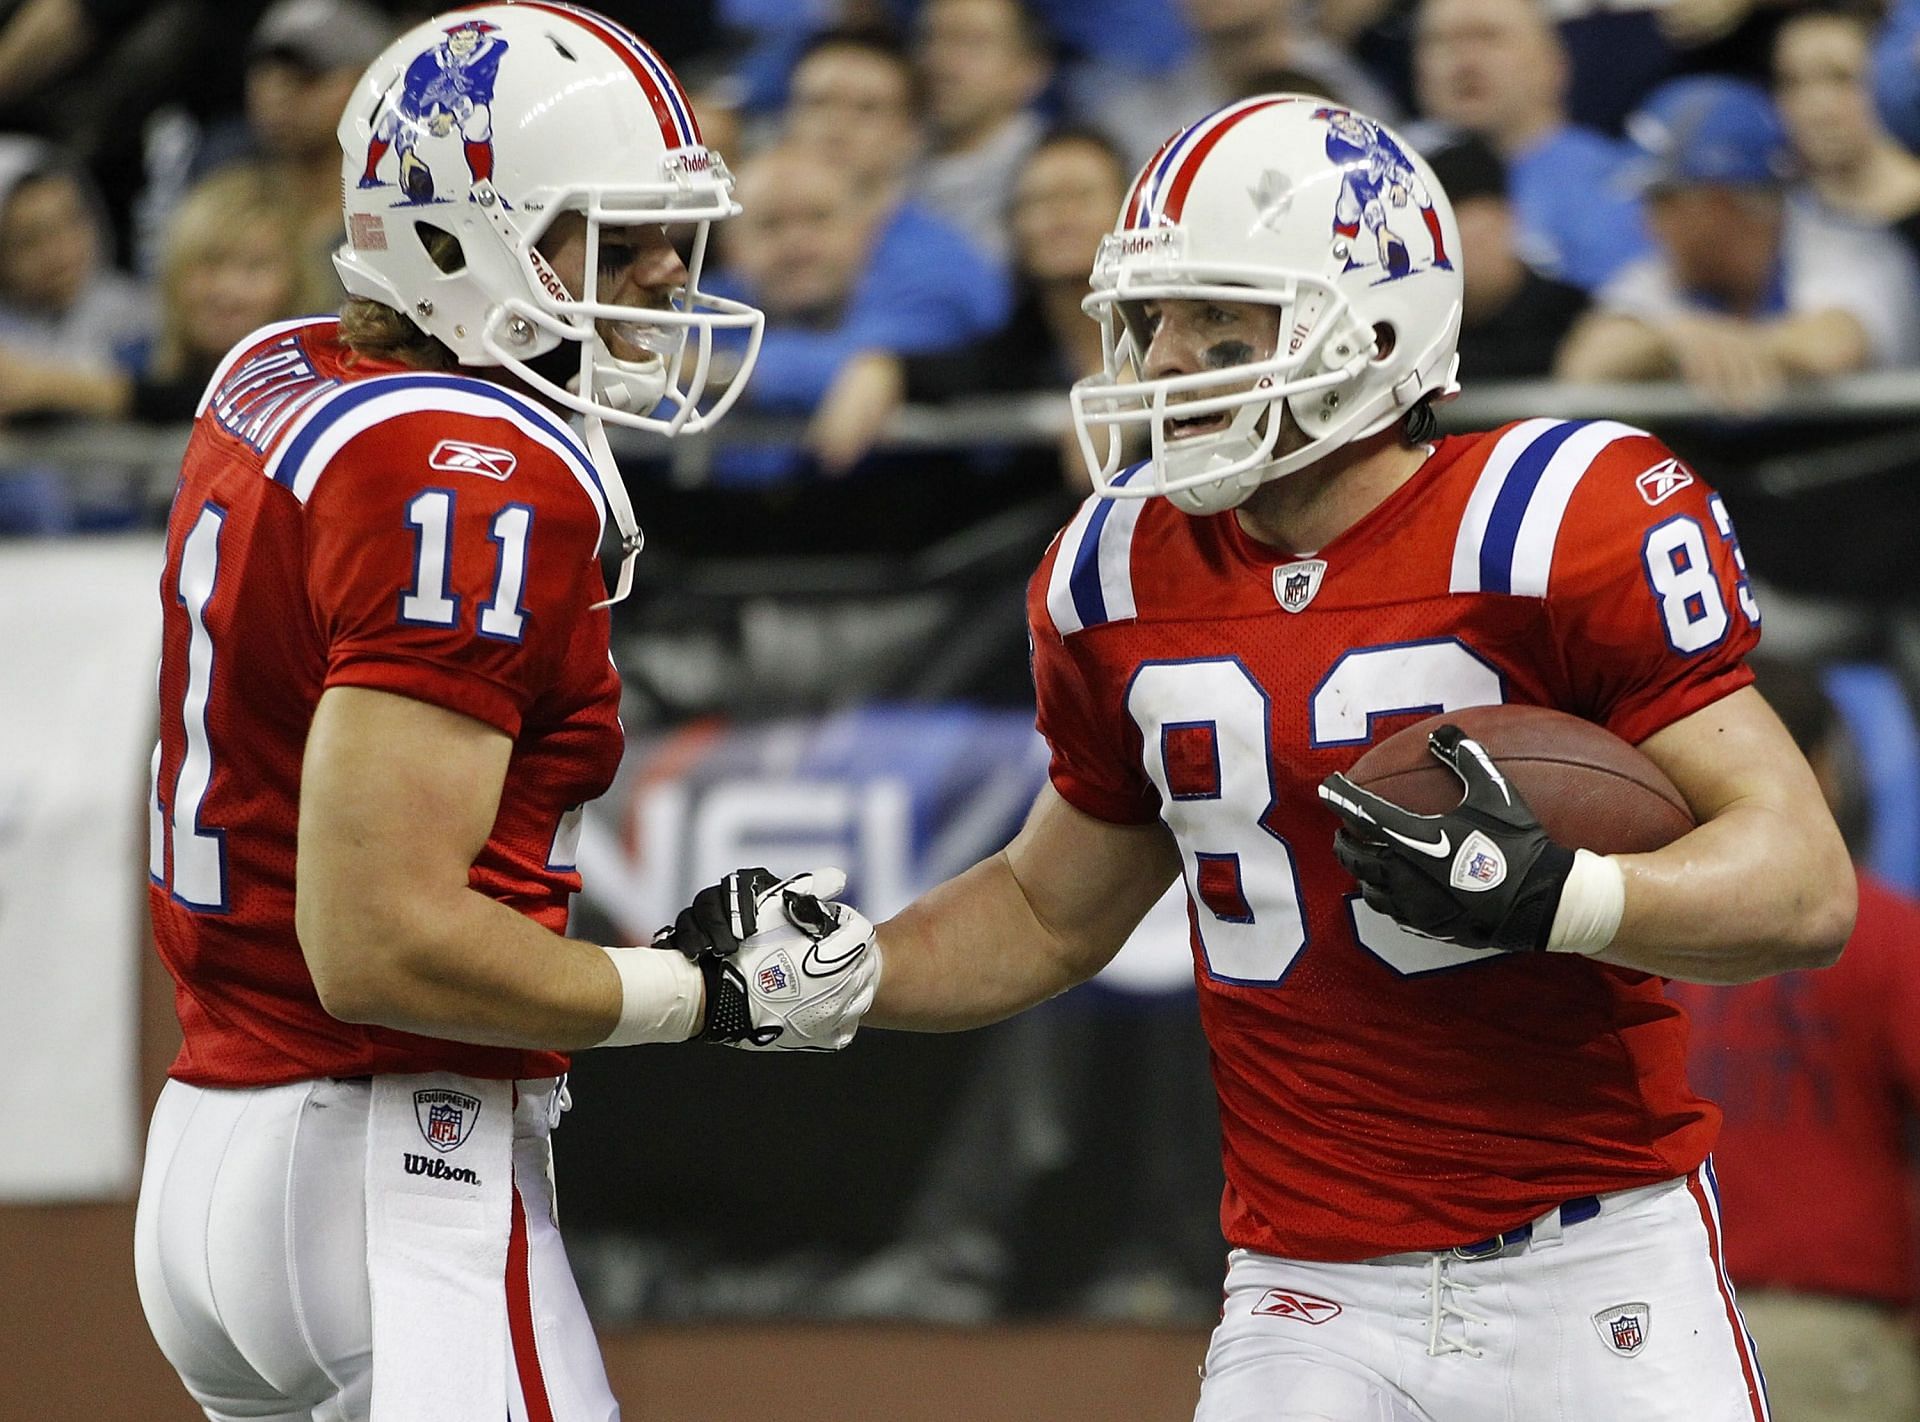 Julian Edelman (11) and Wes Welker adorned in the Pat Patriot throwbacks